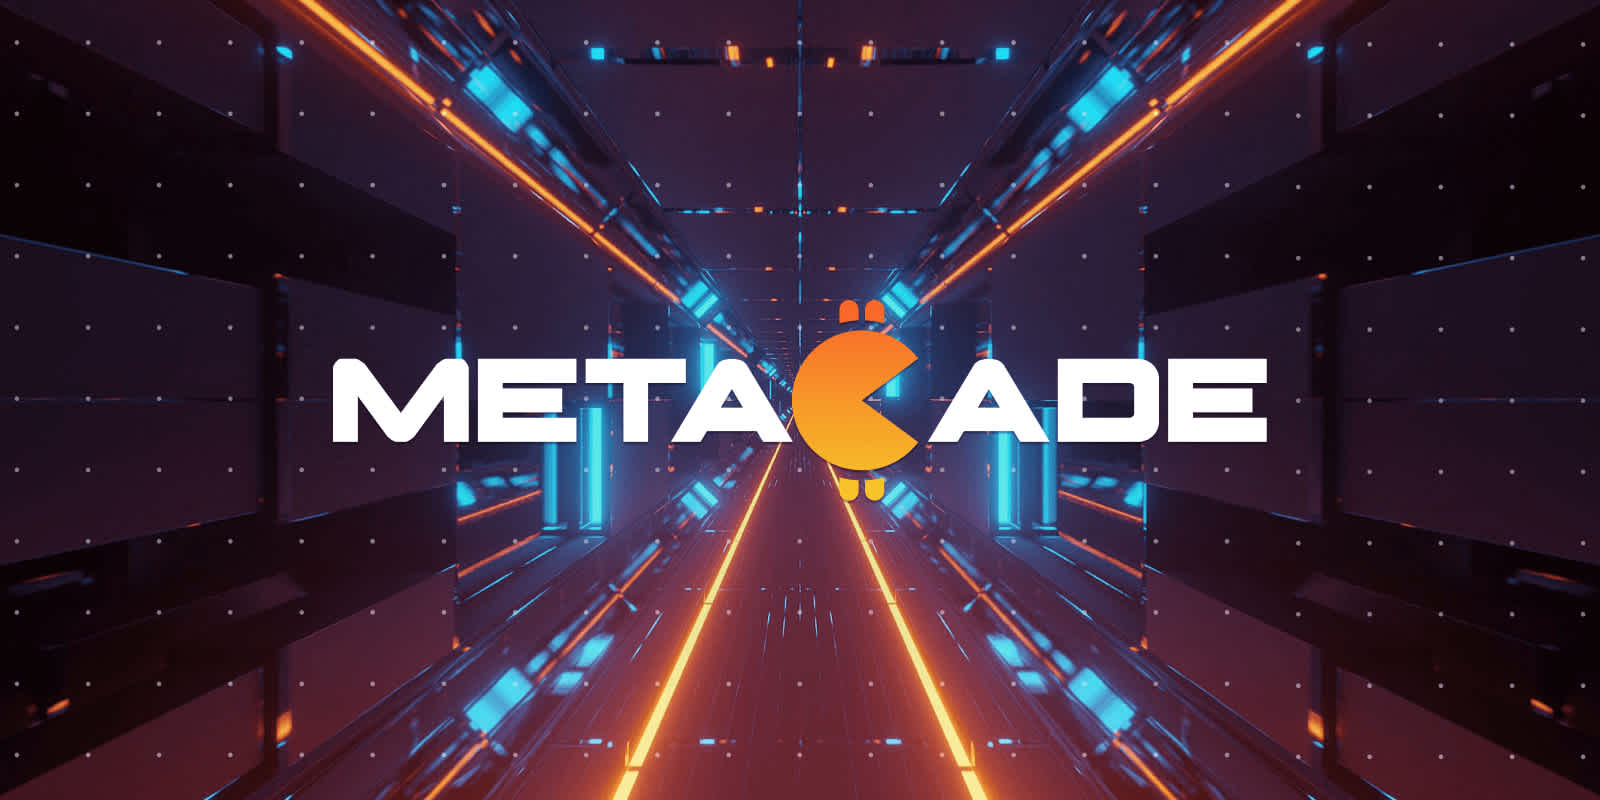 Metacade Presale for Web3’s First-Ever P2E Crypto Arcade Raises Over $670k in Under 2 Weeks